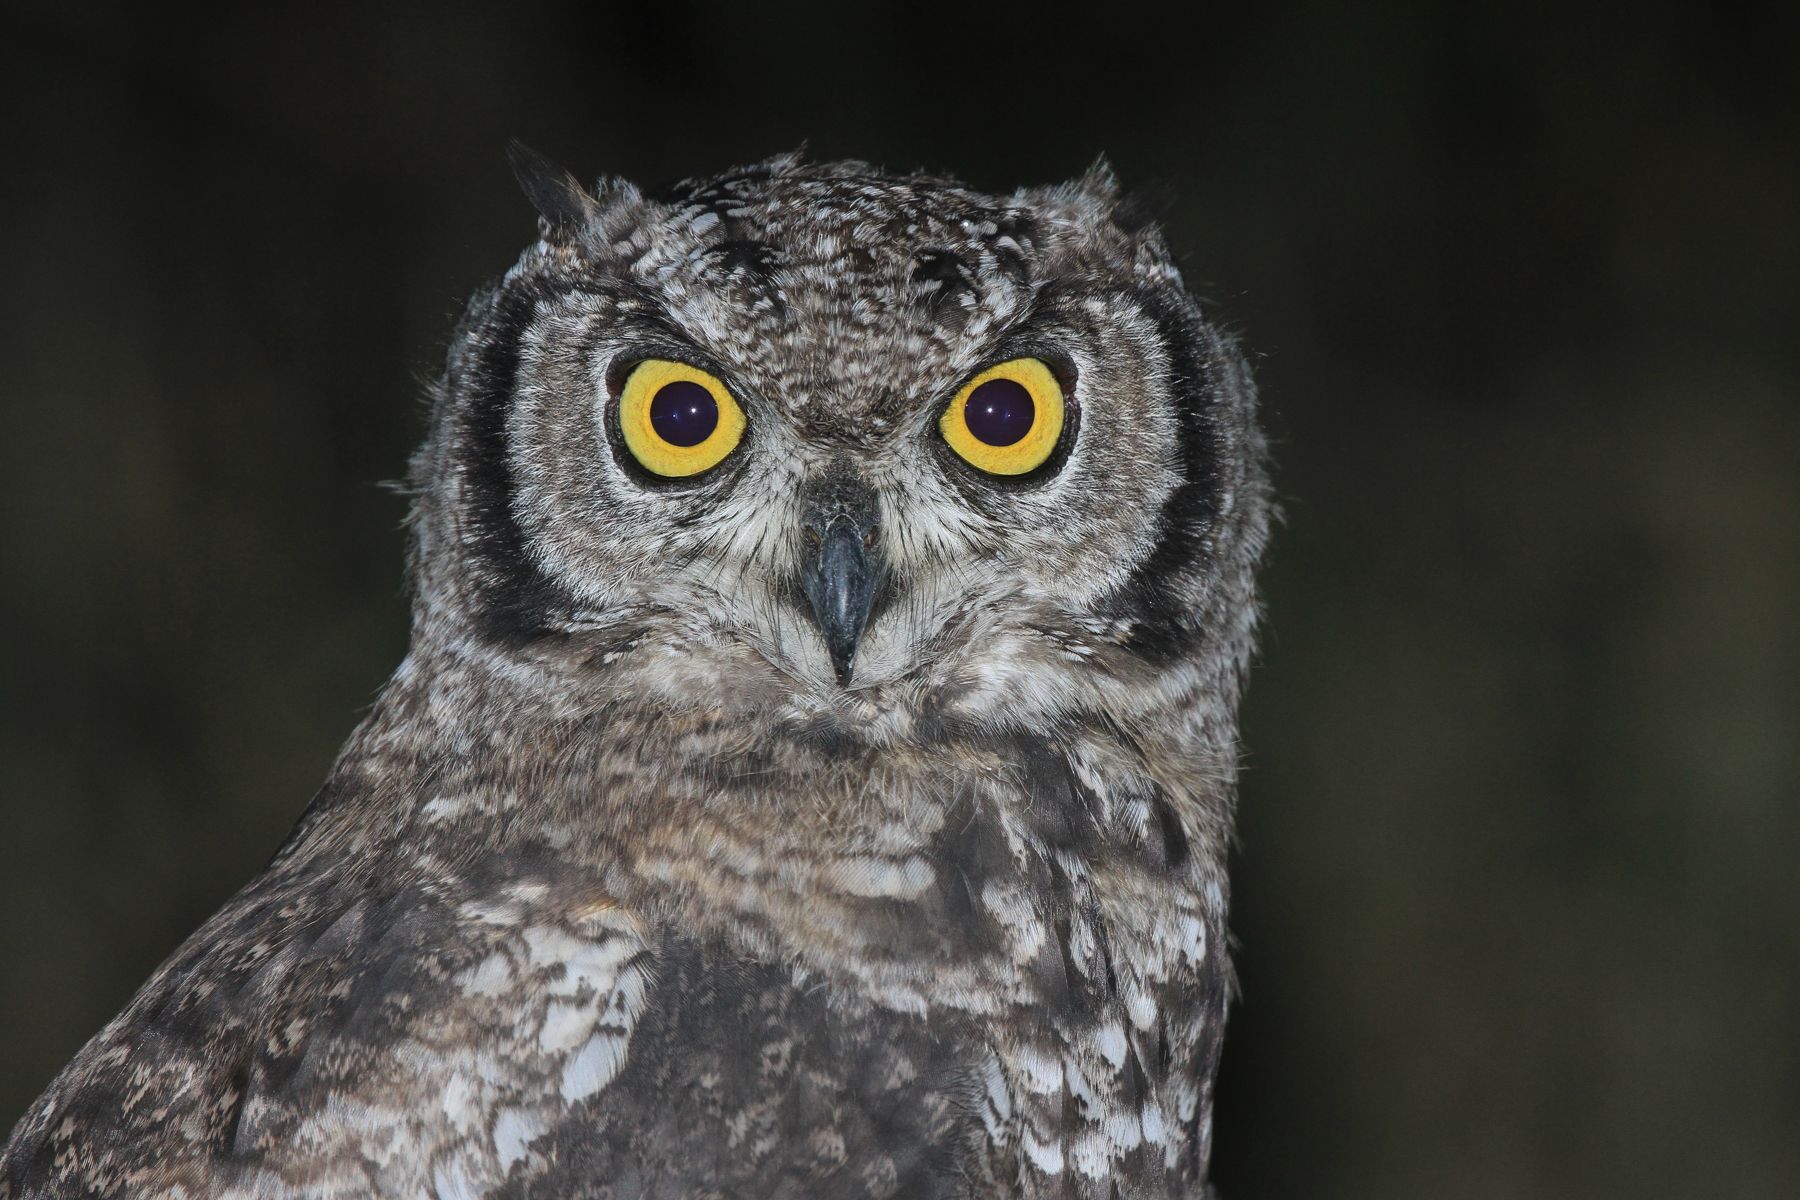 Spotted Eagle-Owl portrait on a Tanzania photography tour by Mark Beaman